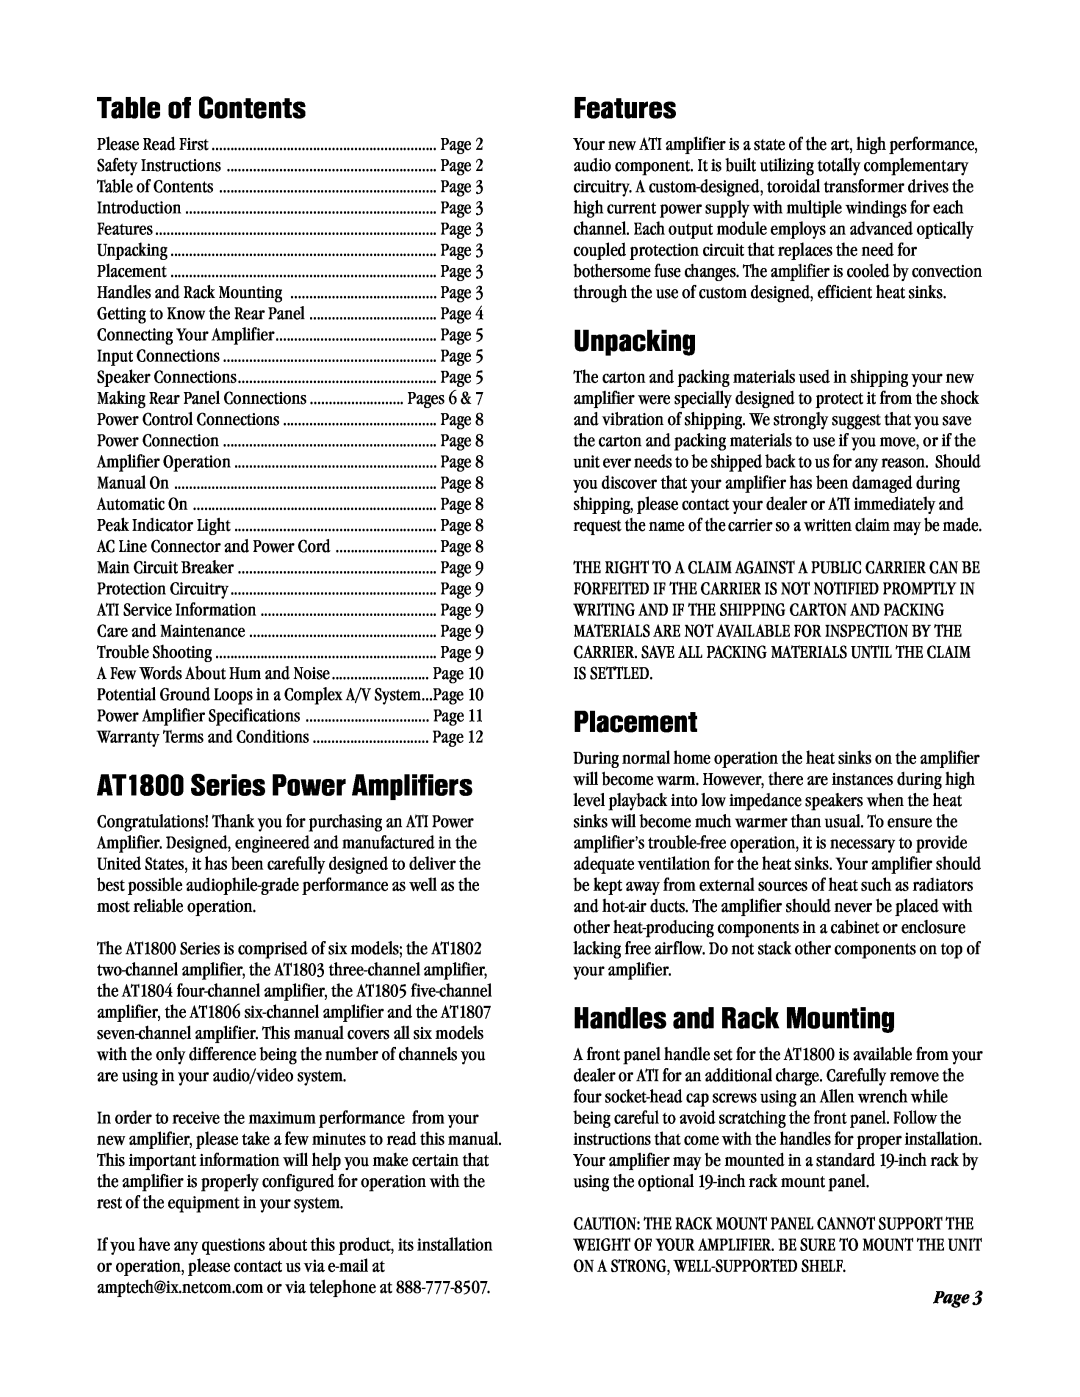 Amplifier Tech AT1800 Series manual Table of Contents, Features, Unpacking, Placement, Handles and Rack Mounting, Page 